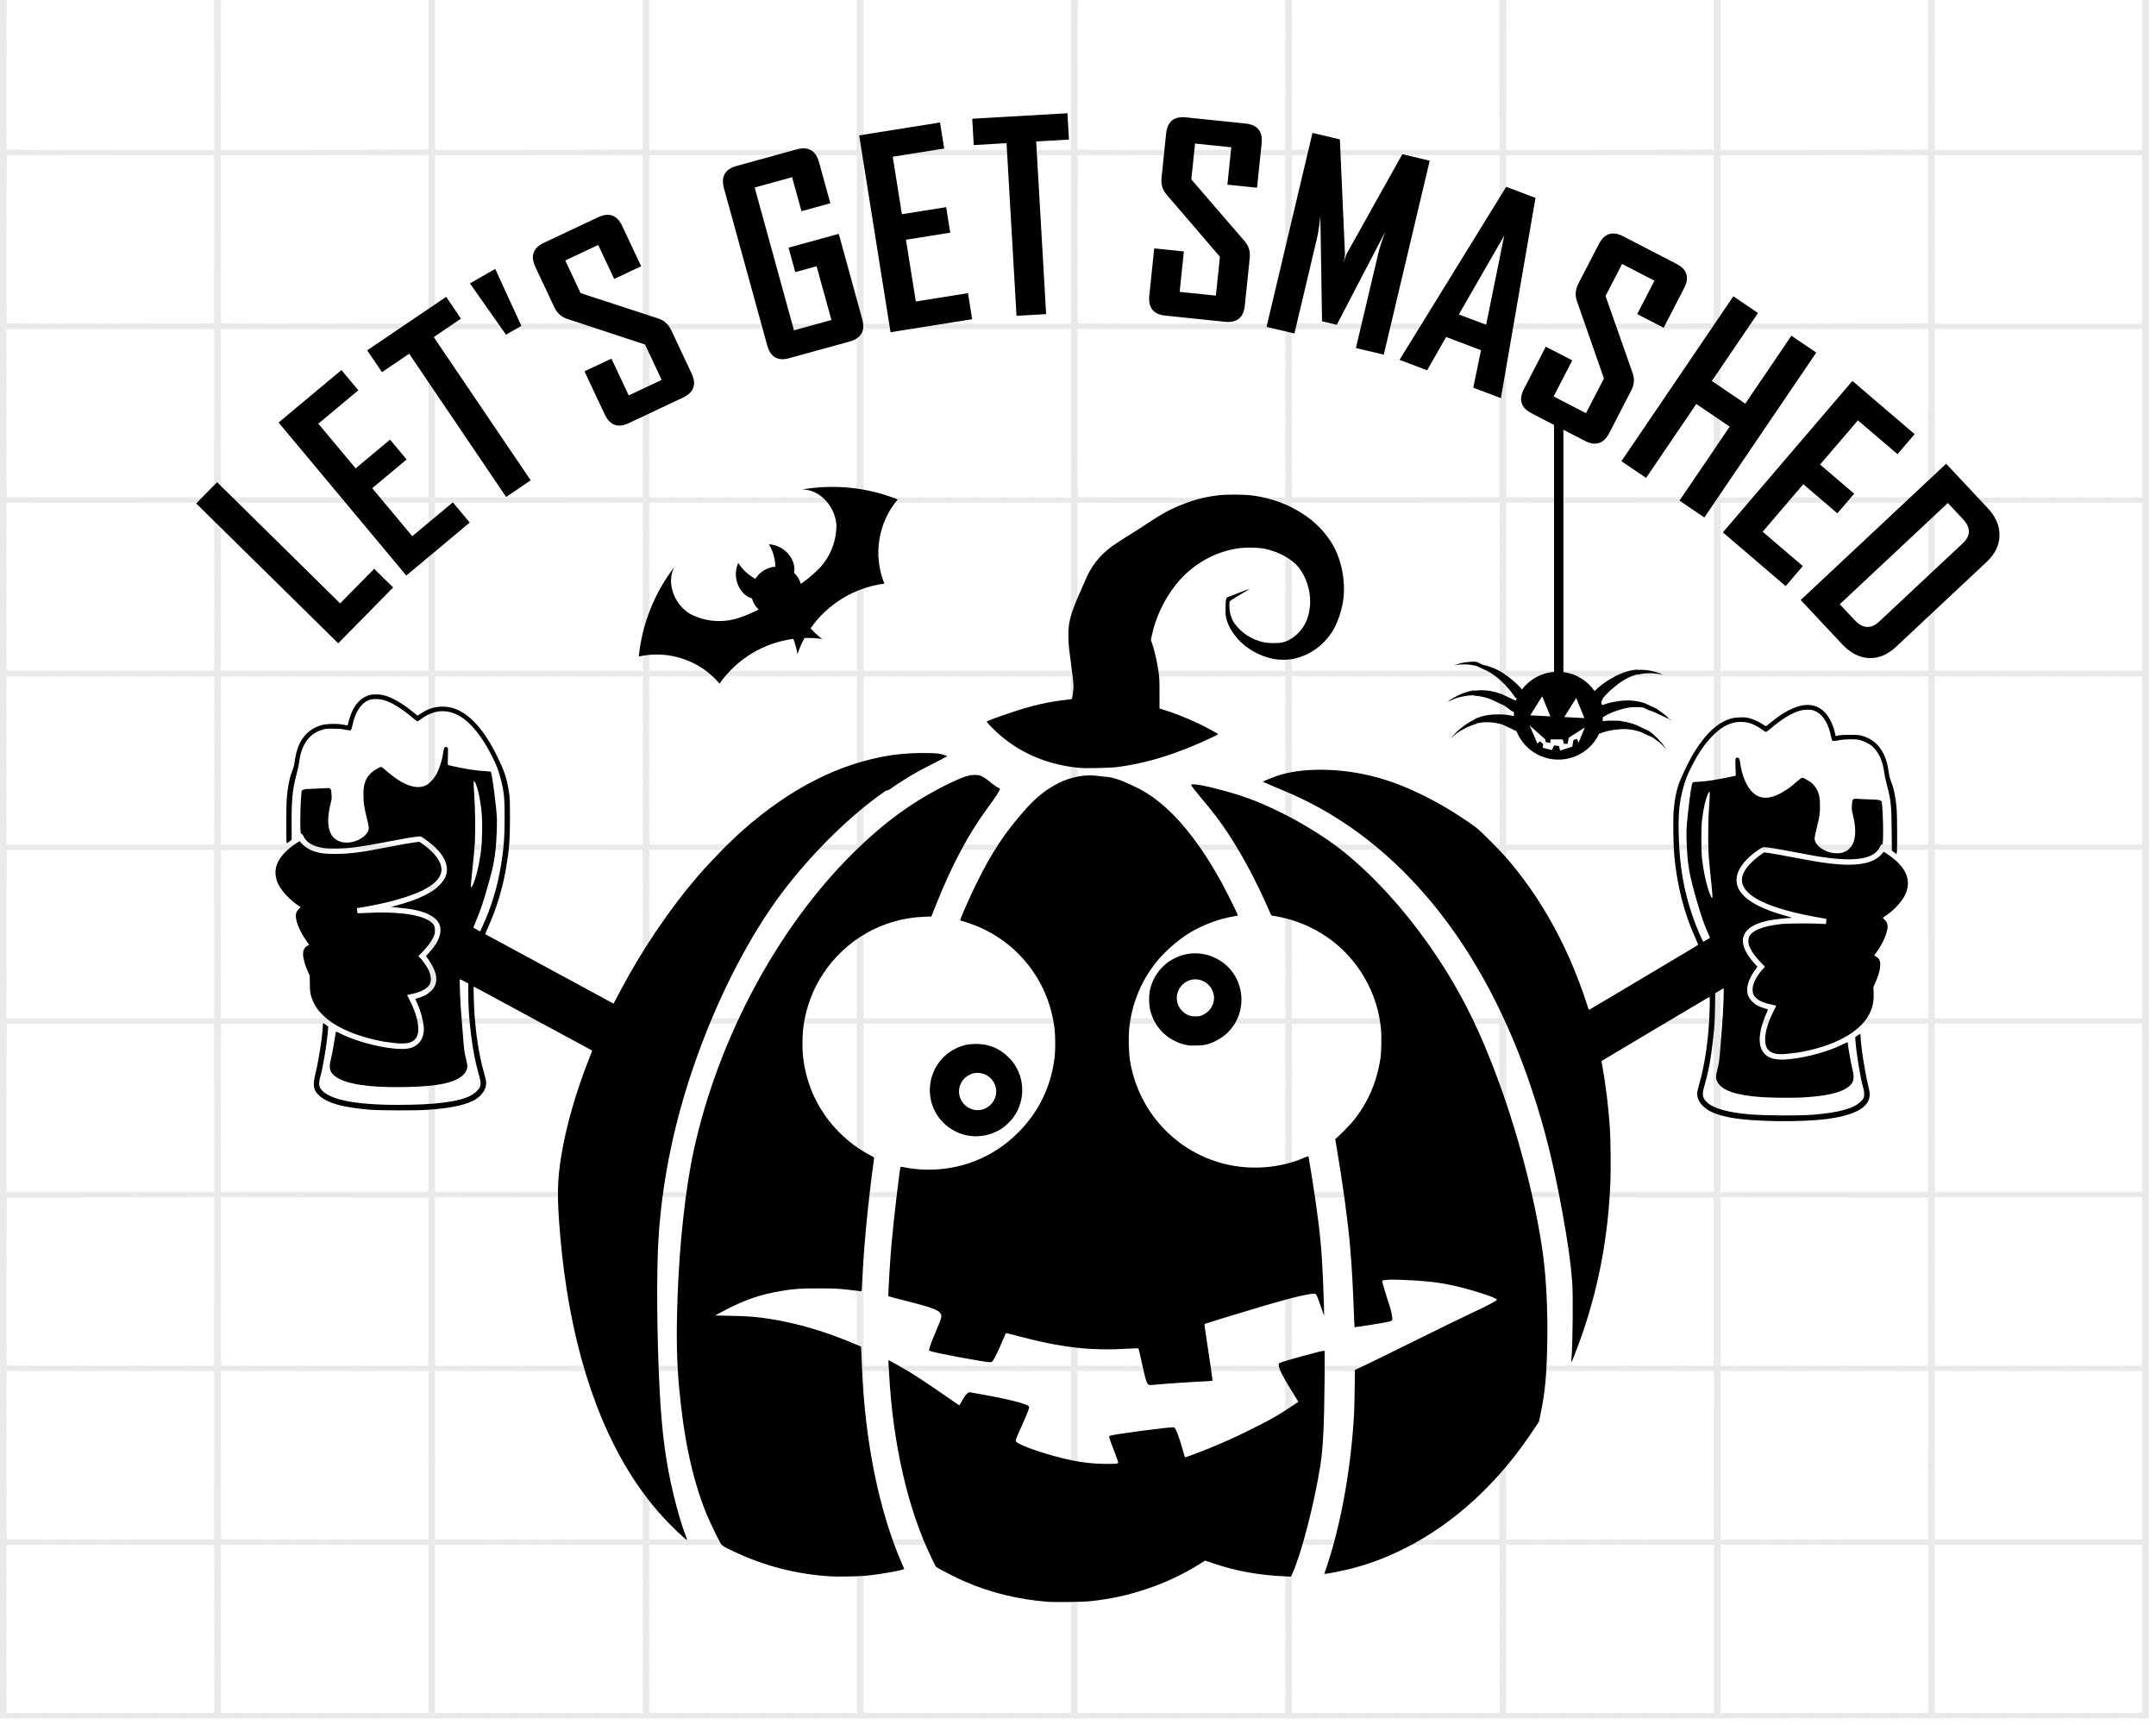 Buy Let's Get Smashed! Alcohol Piñata For Adults!